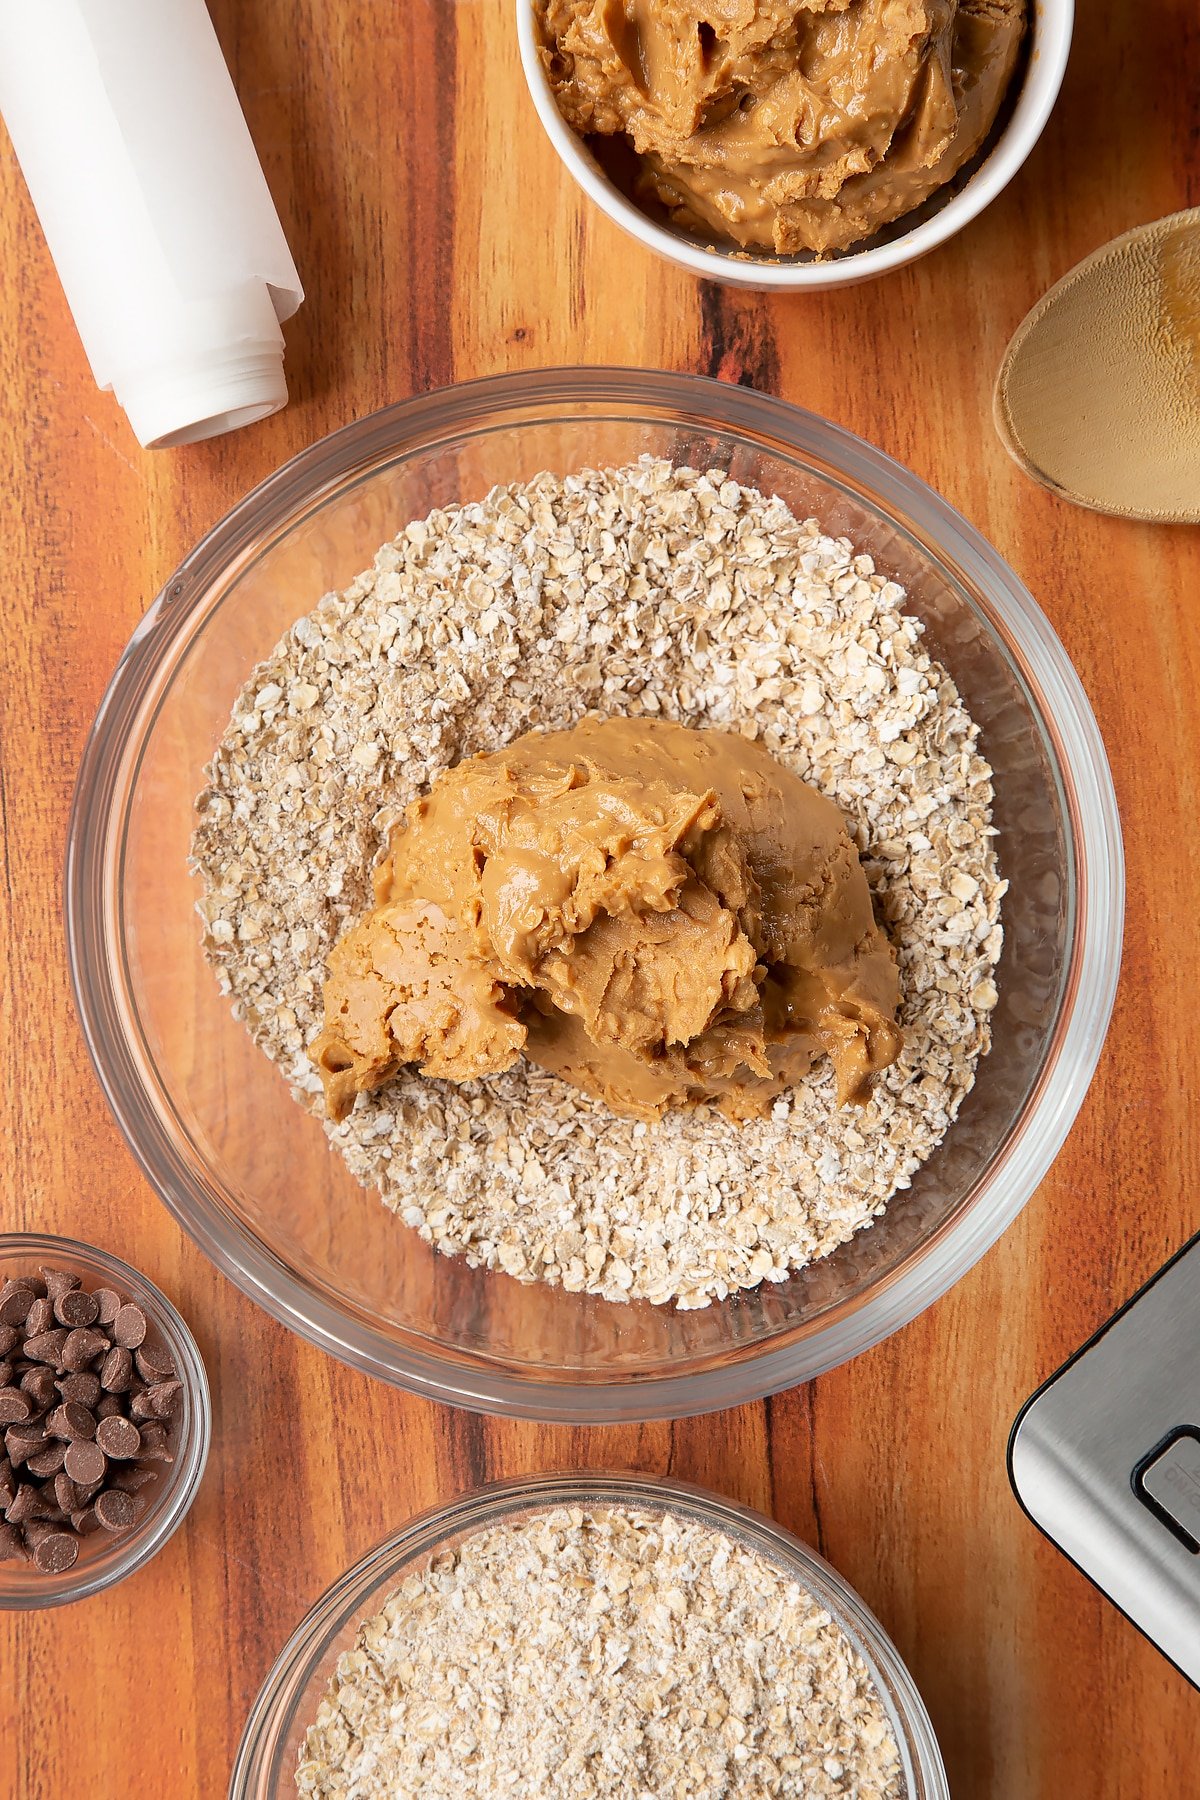 Rolled oats and peanut butter in a glass mixing bowl. Ingredients to make 3 ingredient peanut butter and oatmeal balls surround the bowl.